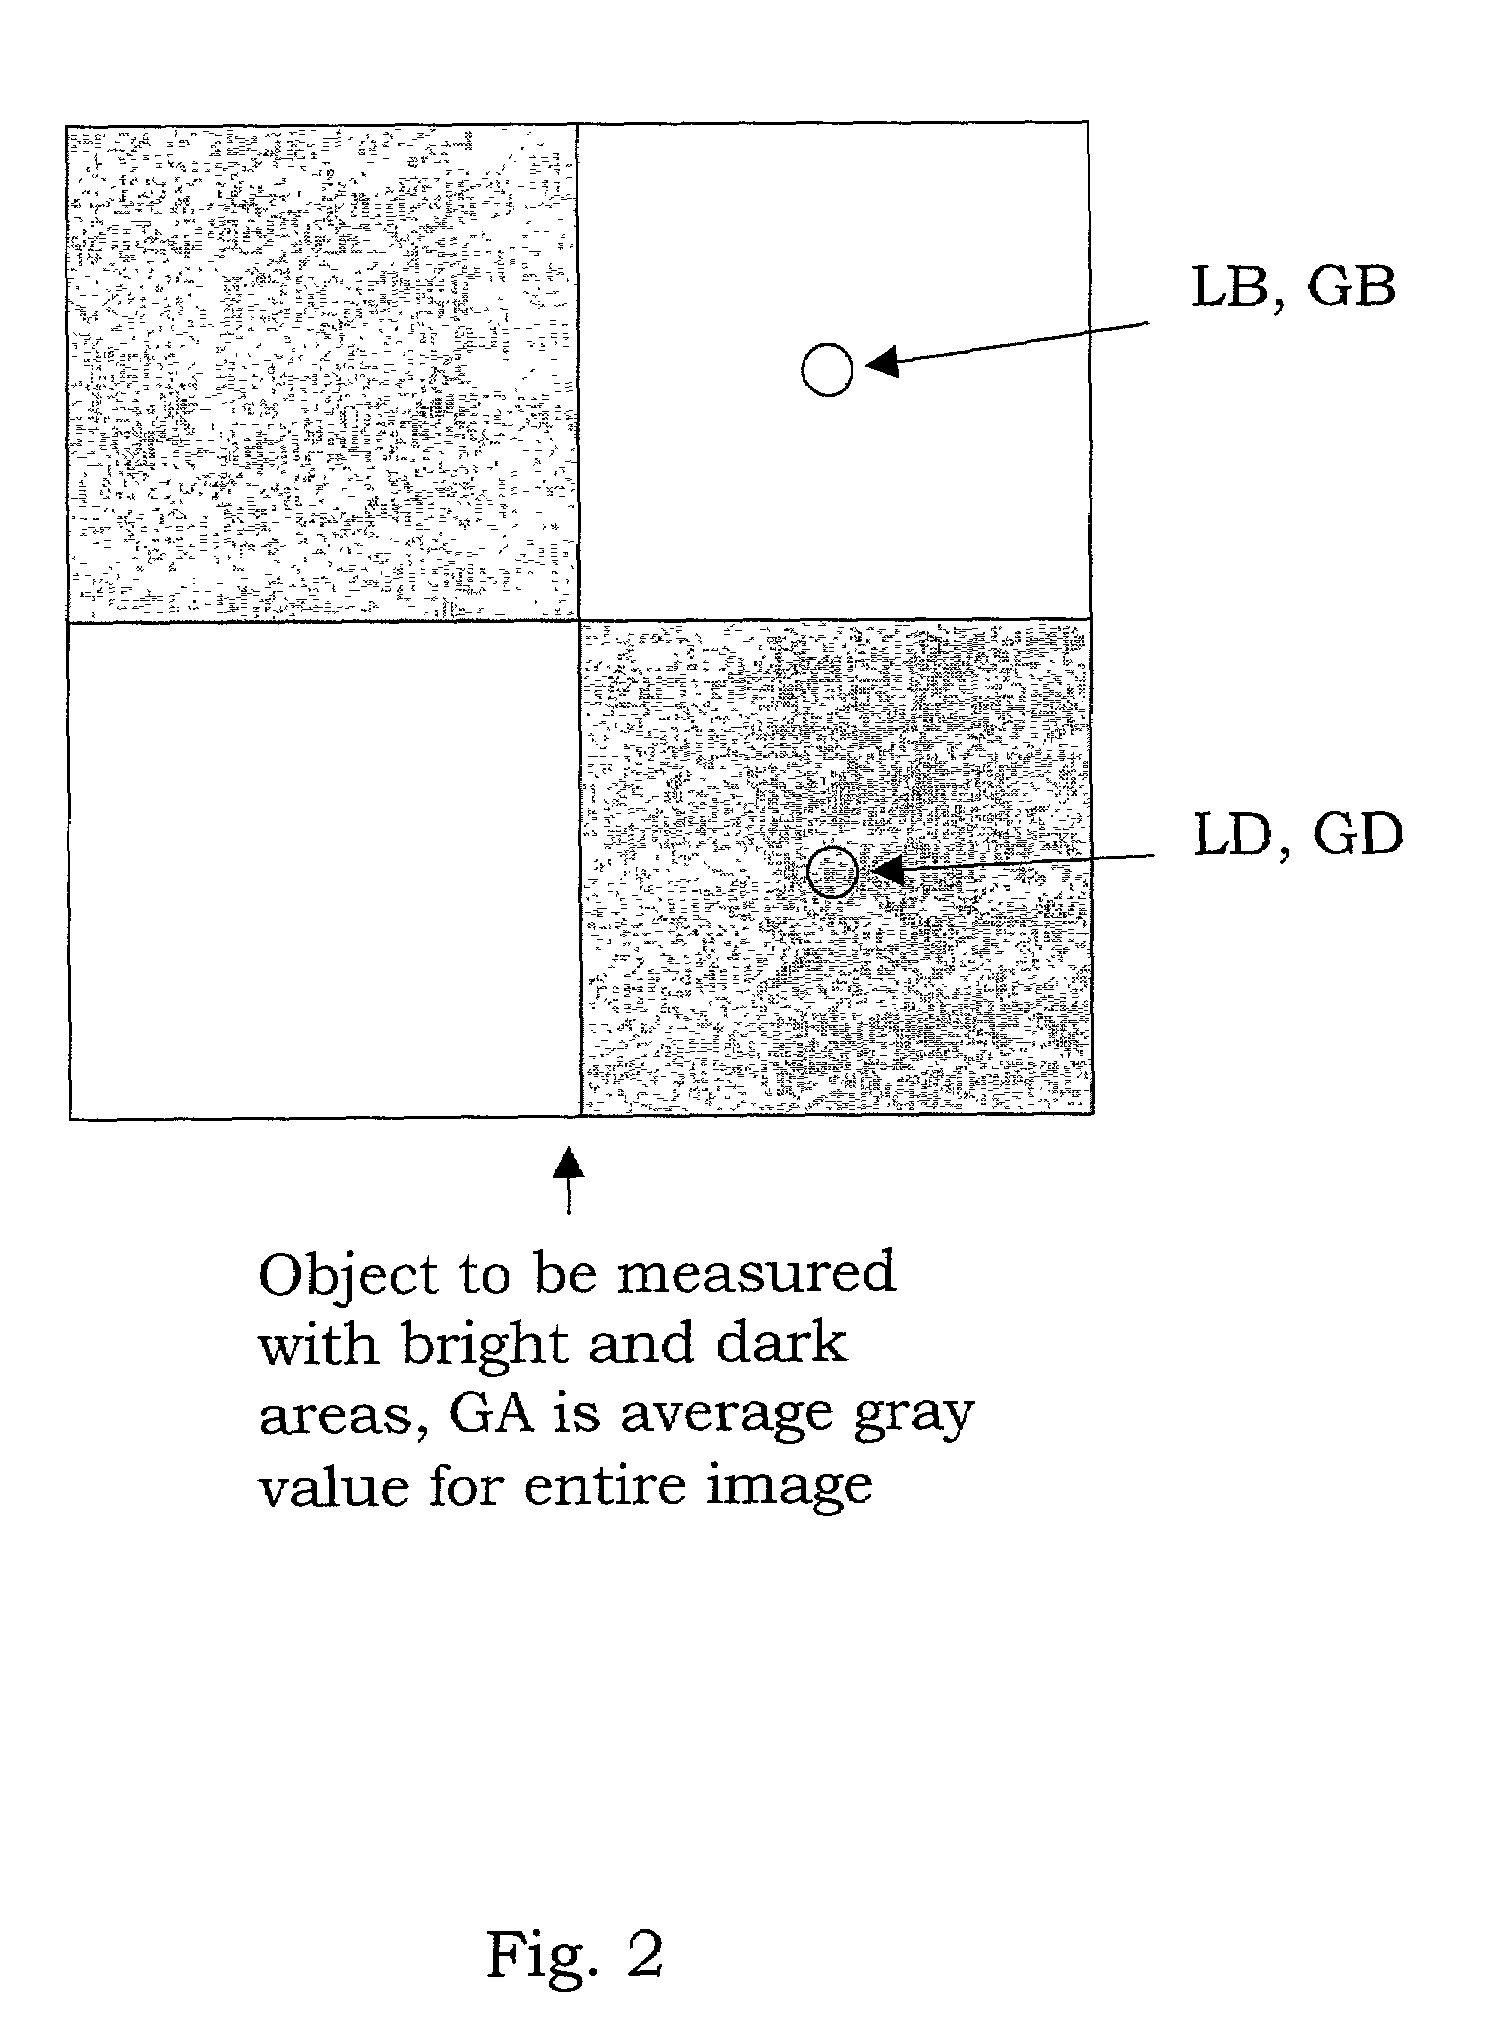 Stray light correction method for imaging light and color measurement system